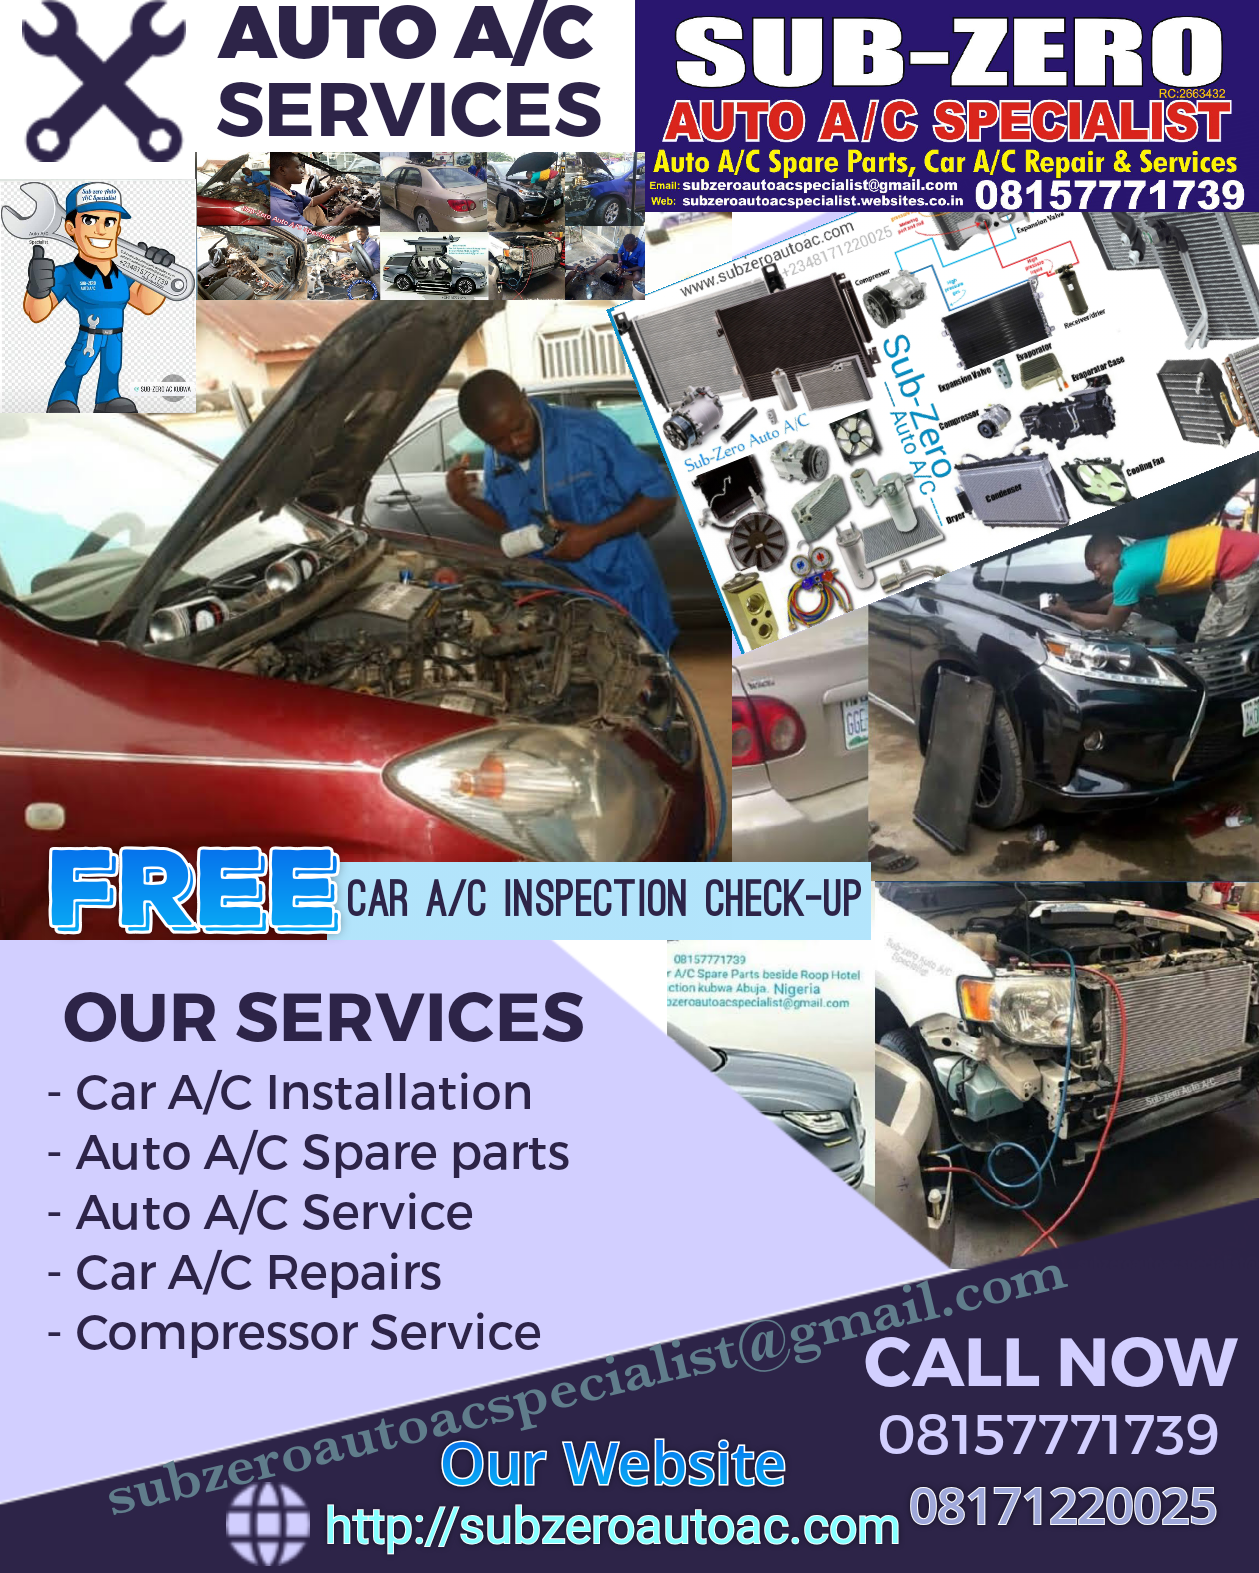 Auto Air-Conditioning Service